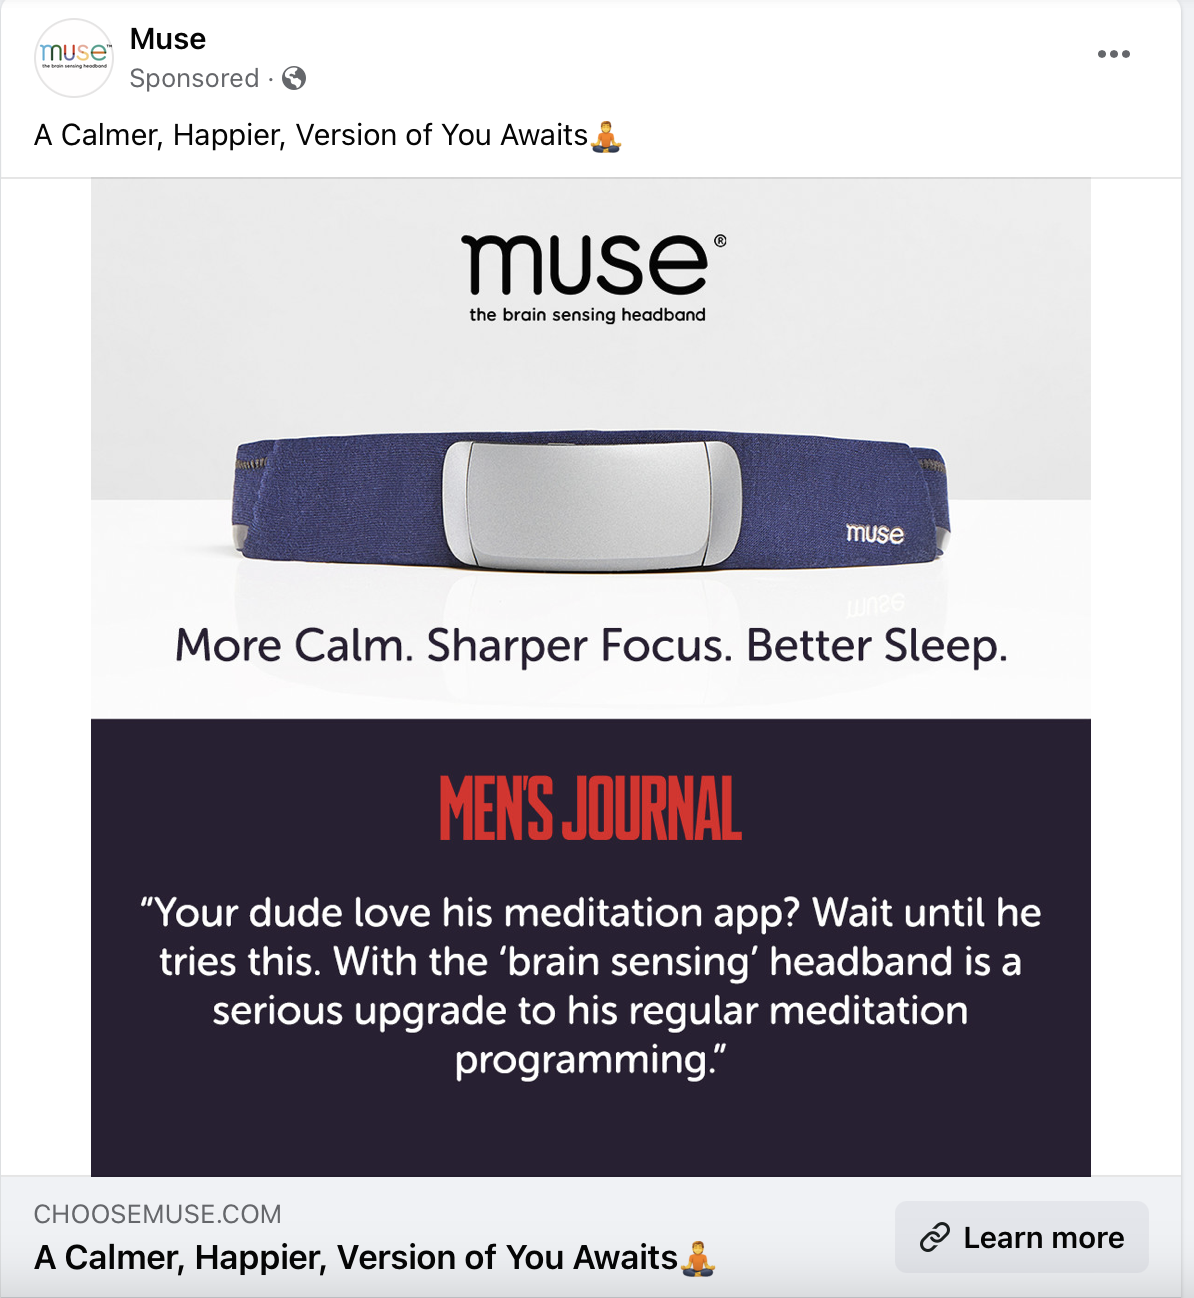 Muse uses paid ads as part of their social media marketing startegy to sell a brand-sensing headband that pairs with their app. 